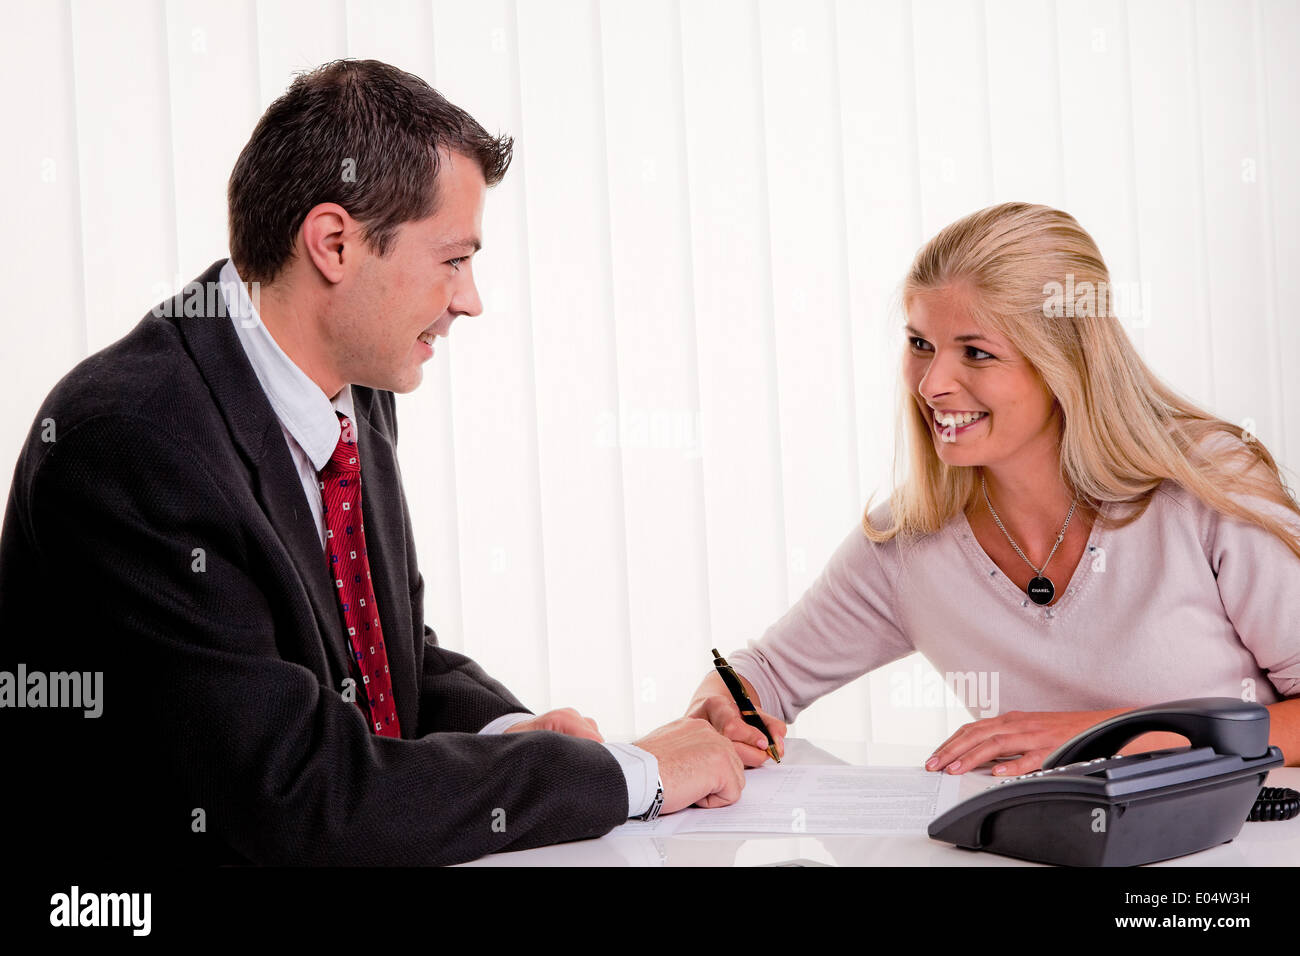 .Work worker employment contract business guarantee office contract of employment document documents marriage contract woman wom Stock Photo